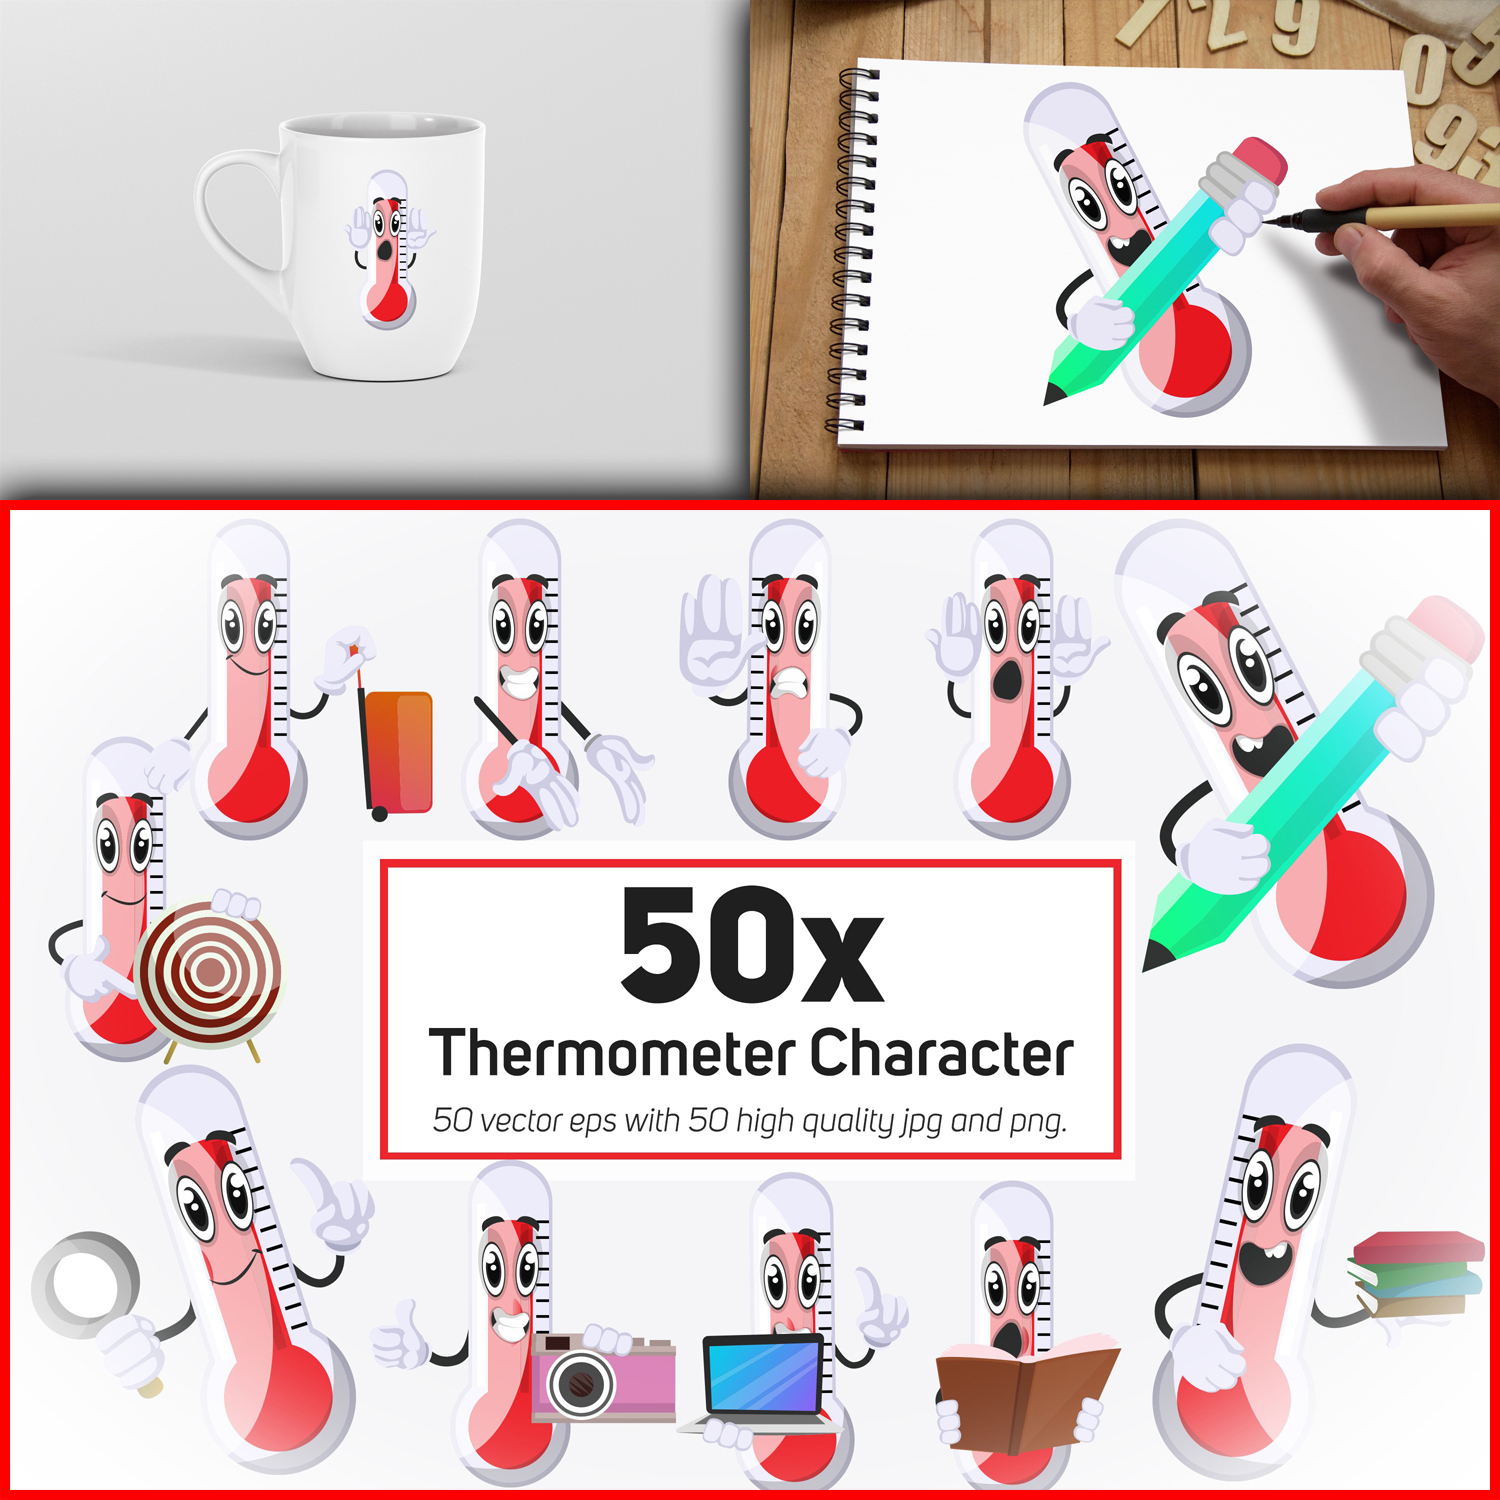 50x Thermometer Character or Mascot collection illustration. cover.